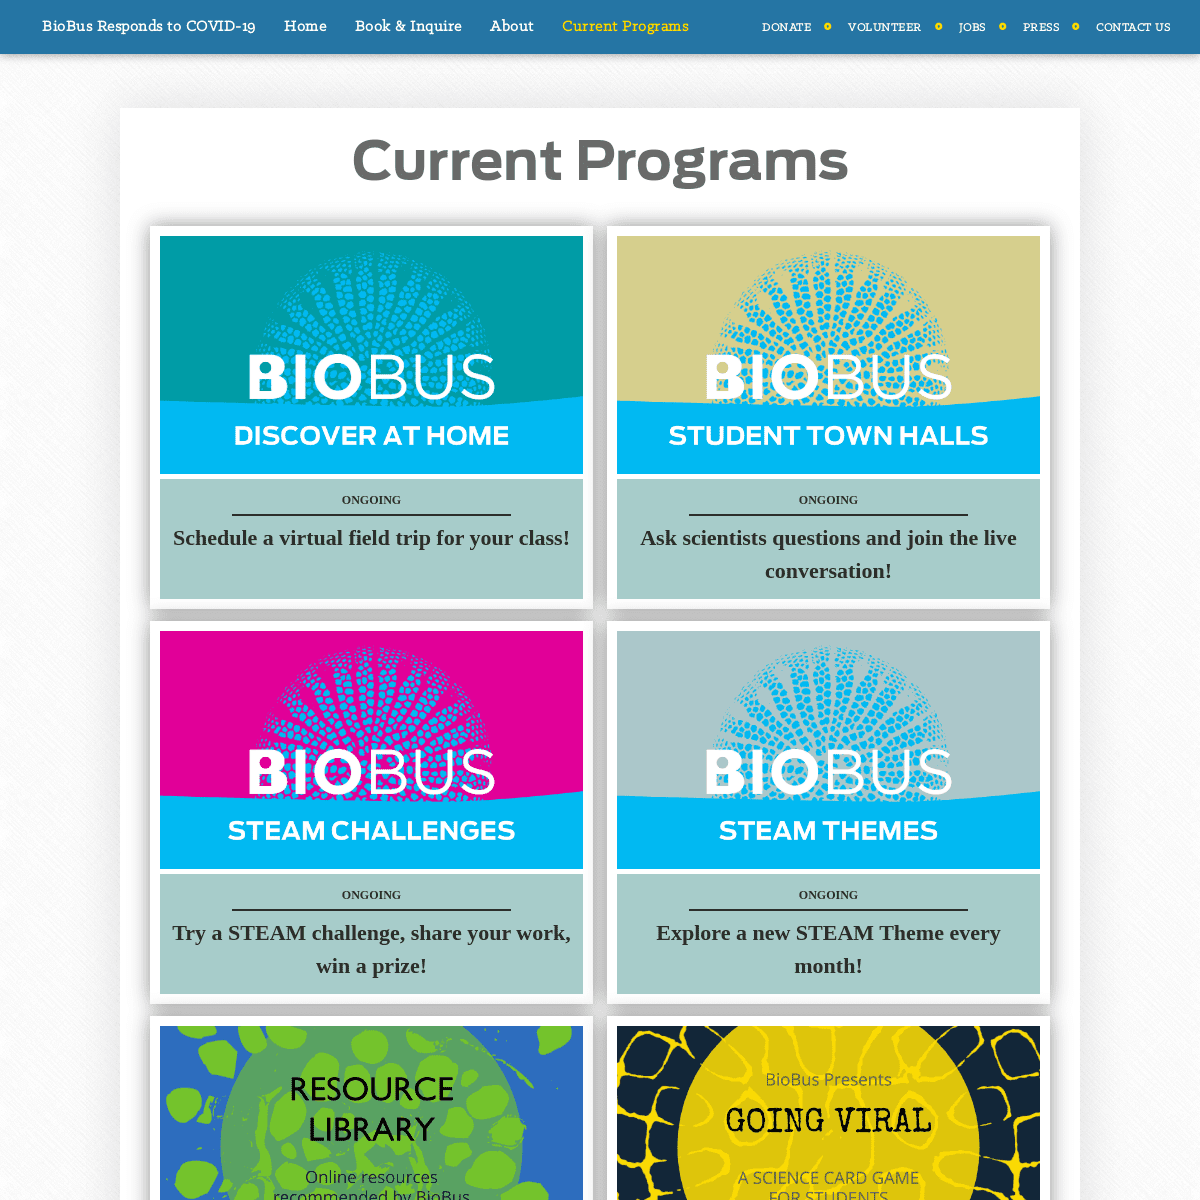 A complete backup of https://biobus.org